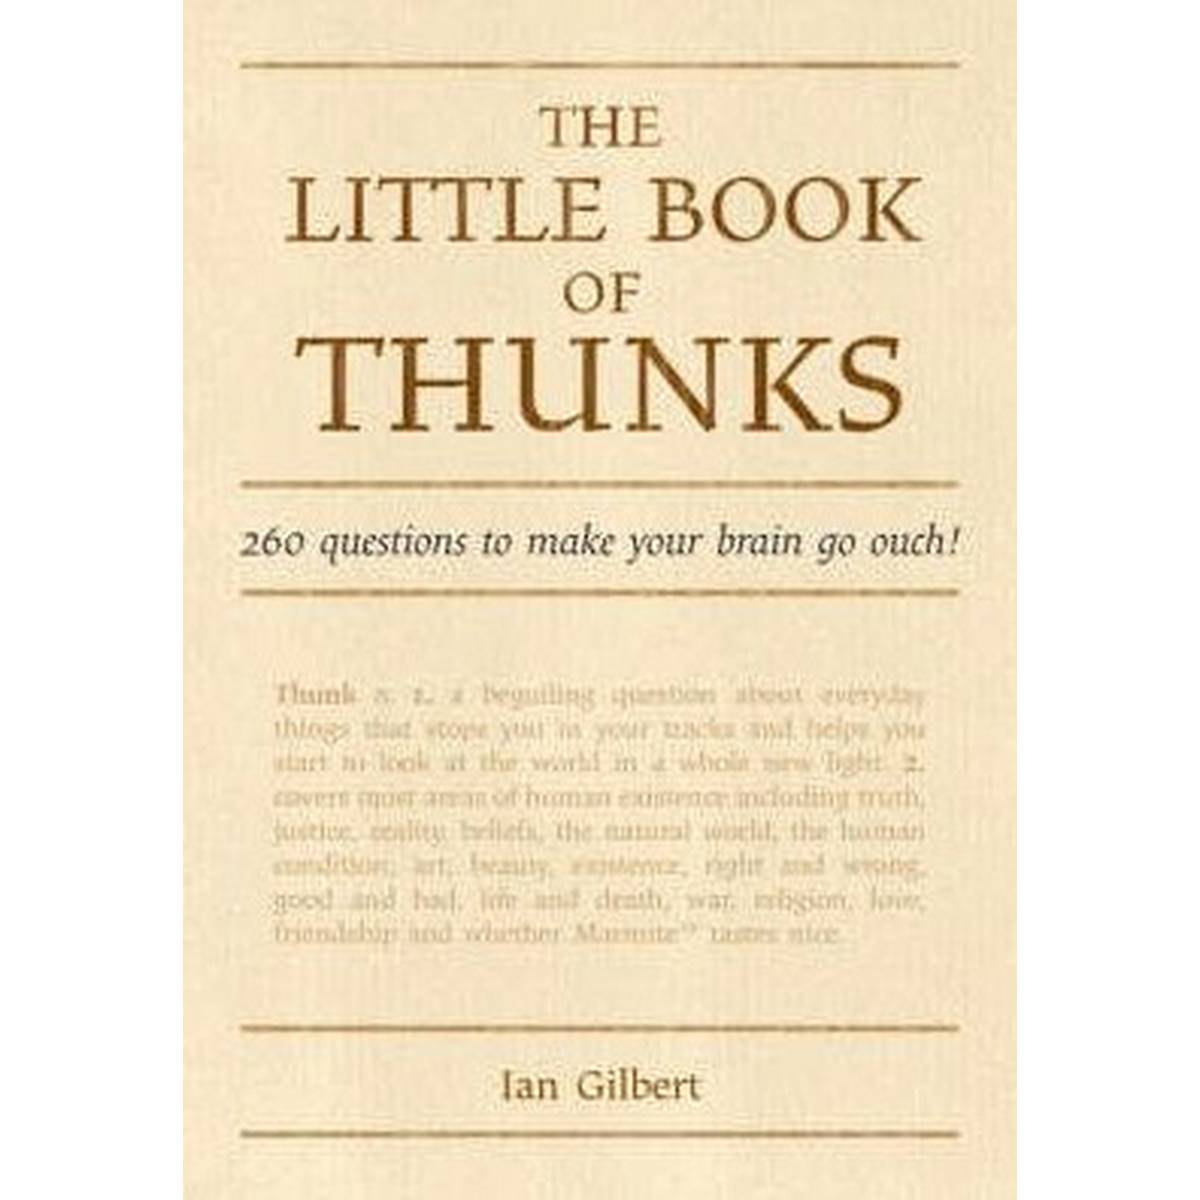 Little Book of Thunks, The